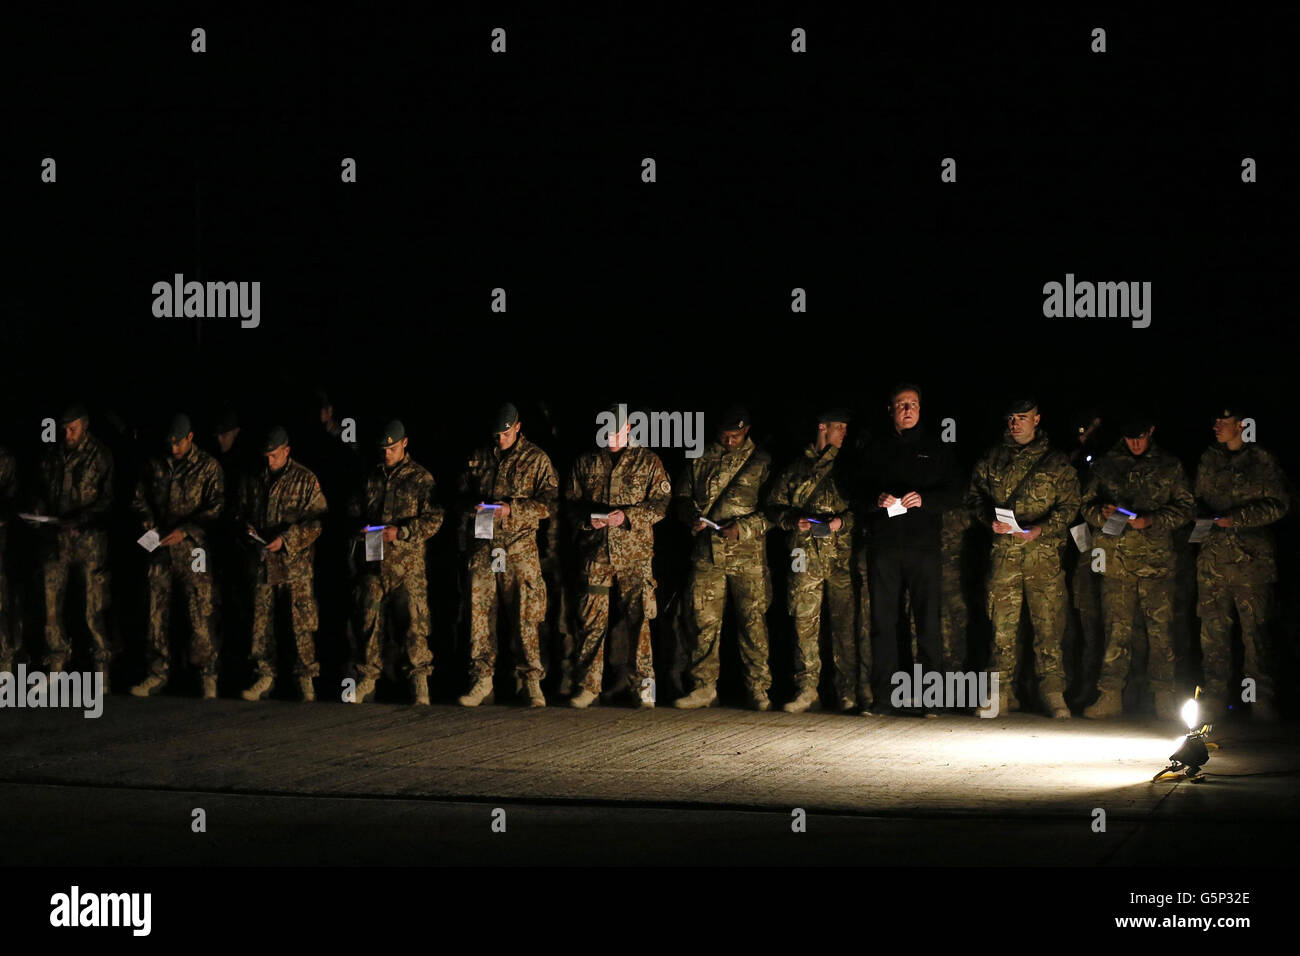 Prime Minister David Cameron attends a carol service with British soldiers, as well as Danish and Bosnian soldiers, during a visit to Forward Operating Base Price in Helmand Province, Afghanistan. Stock Photo